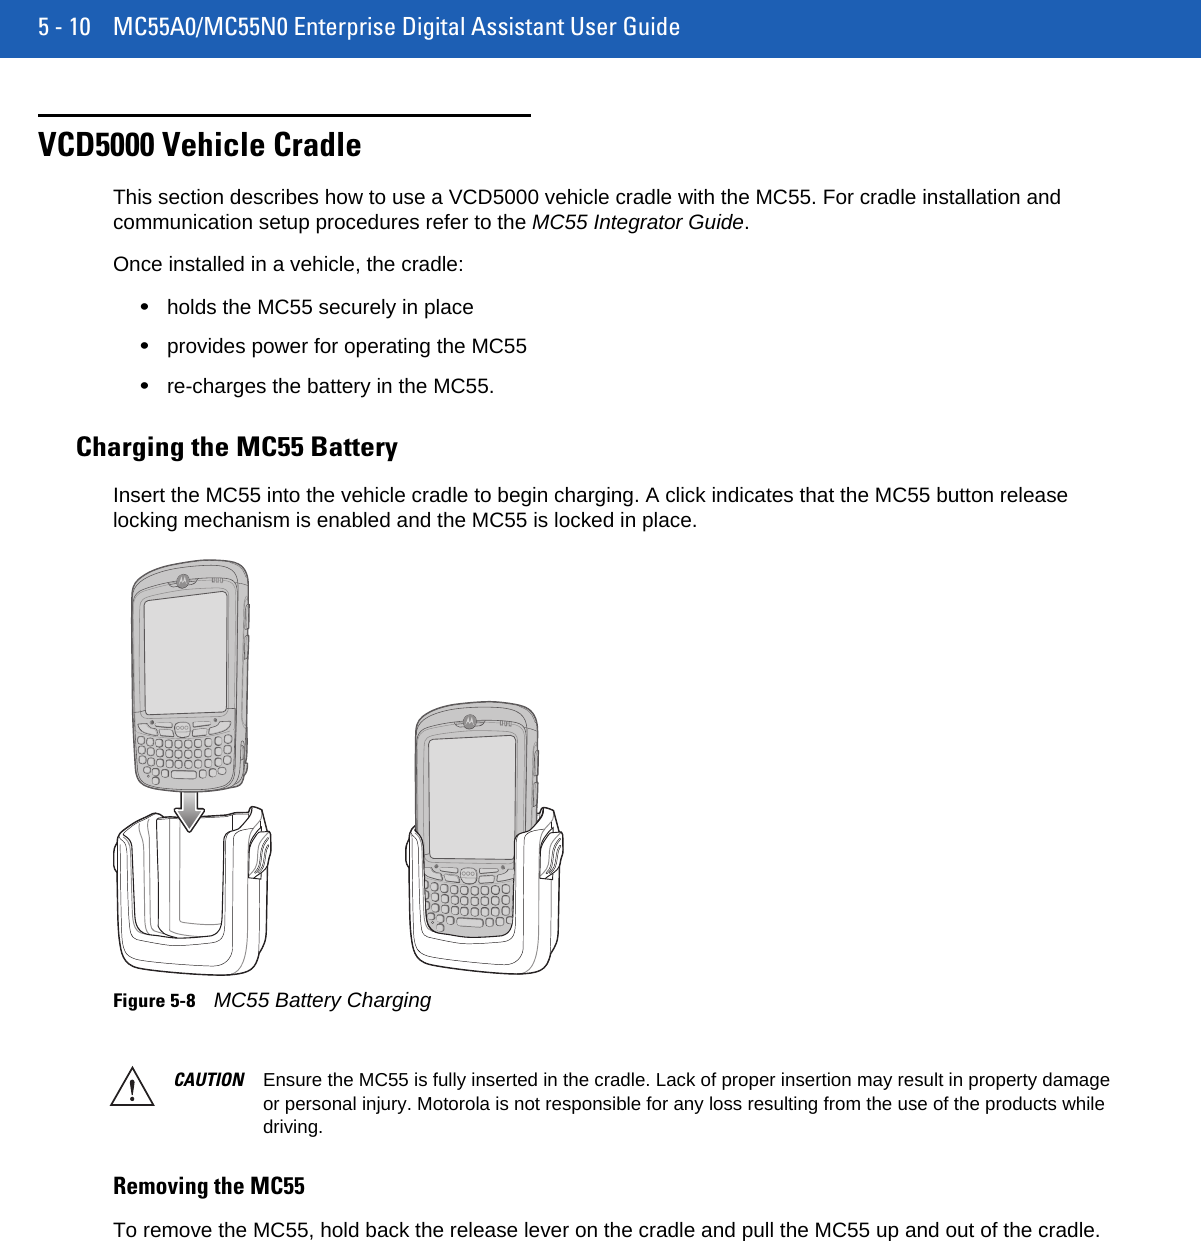 5 - 10 MC55A0/MC55N0 Enterprise Digital Assistant User GuideVCD5000 Vehicle CradleThis section describes how to use a VCD5000 vehicle cradle with the MC55. For cradle installation and communication setup procedures refer to the MC55 Integrator Guide.Once installed in a vehicle, the cradle:•holds the MC55 securely in place•provides power for operating the MC55•re-charges the battery in the MC55.Charging the MC55 BatteryInsert the MC55 into the vehicle cradle to begin charging. A click indicates that the MC55 button release locking mechanism is enabled and the MC55 is locked in place.Figure 5-8MC55 Battery ChargingRemoving the MC55To remove the MC55, hold back the release lever on the cradle and pull the MC55 up and out of the cradle.CAUTION Ensure the MC55 is fully inserted in the cradle. Lack of proper insertion may result in property damage or personal injury. Motorola is not responsible for any loss resulting from the use of the products while driving. 